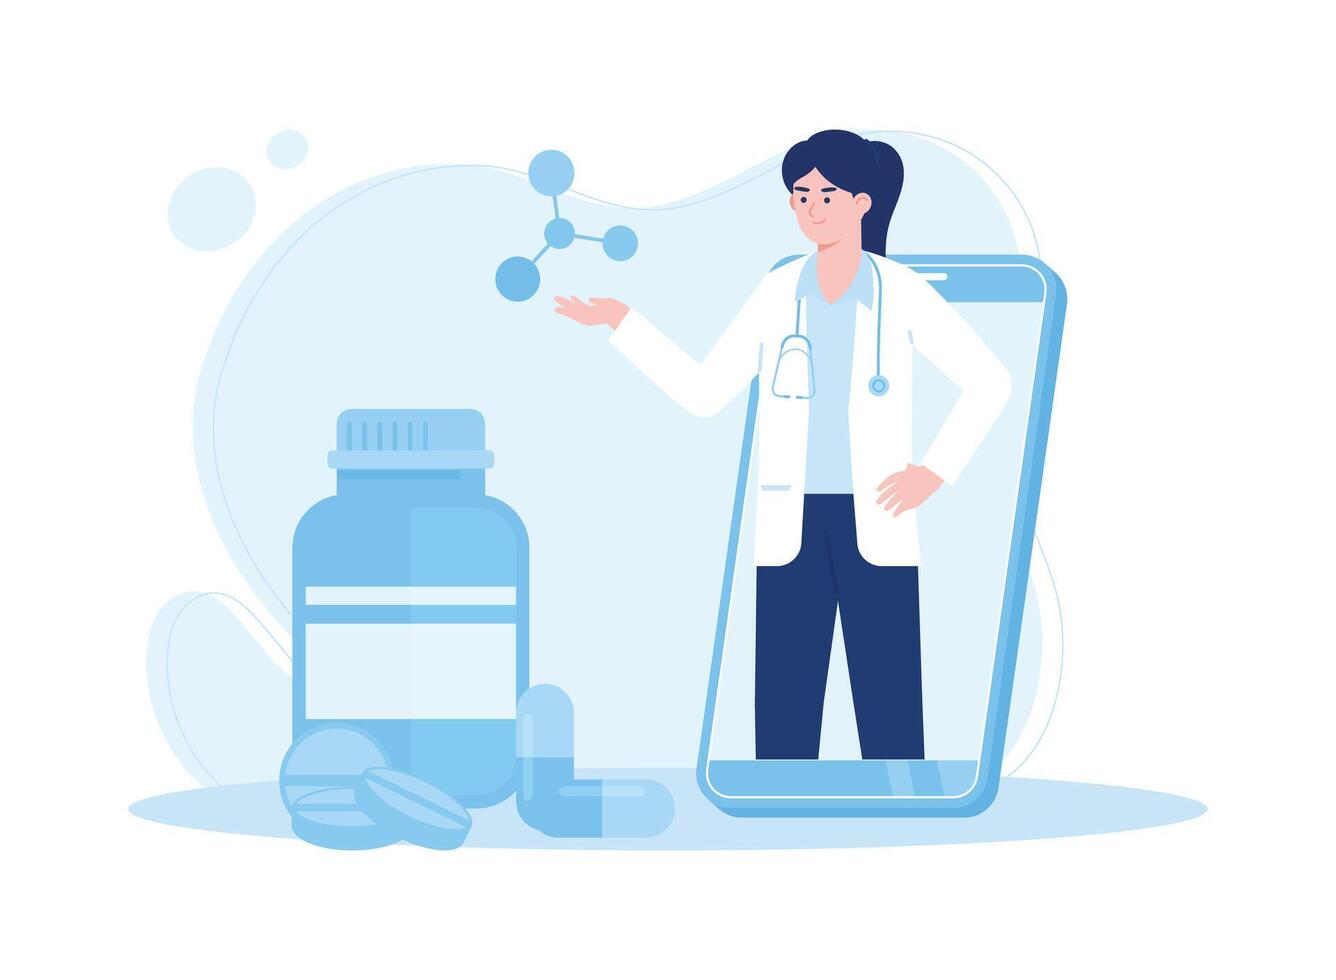 online consultations with doctors and pharmacy services concept flat illustration vector